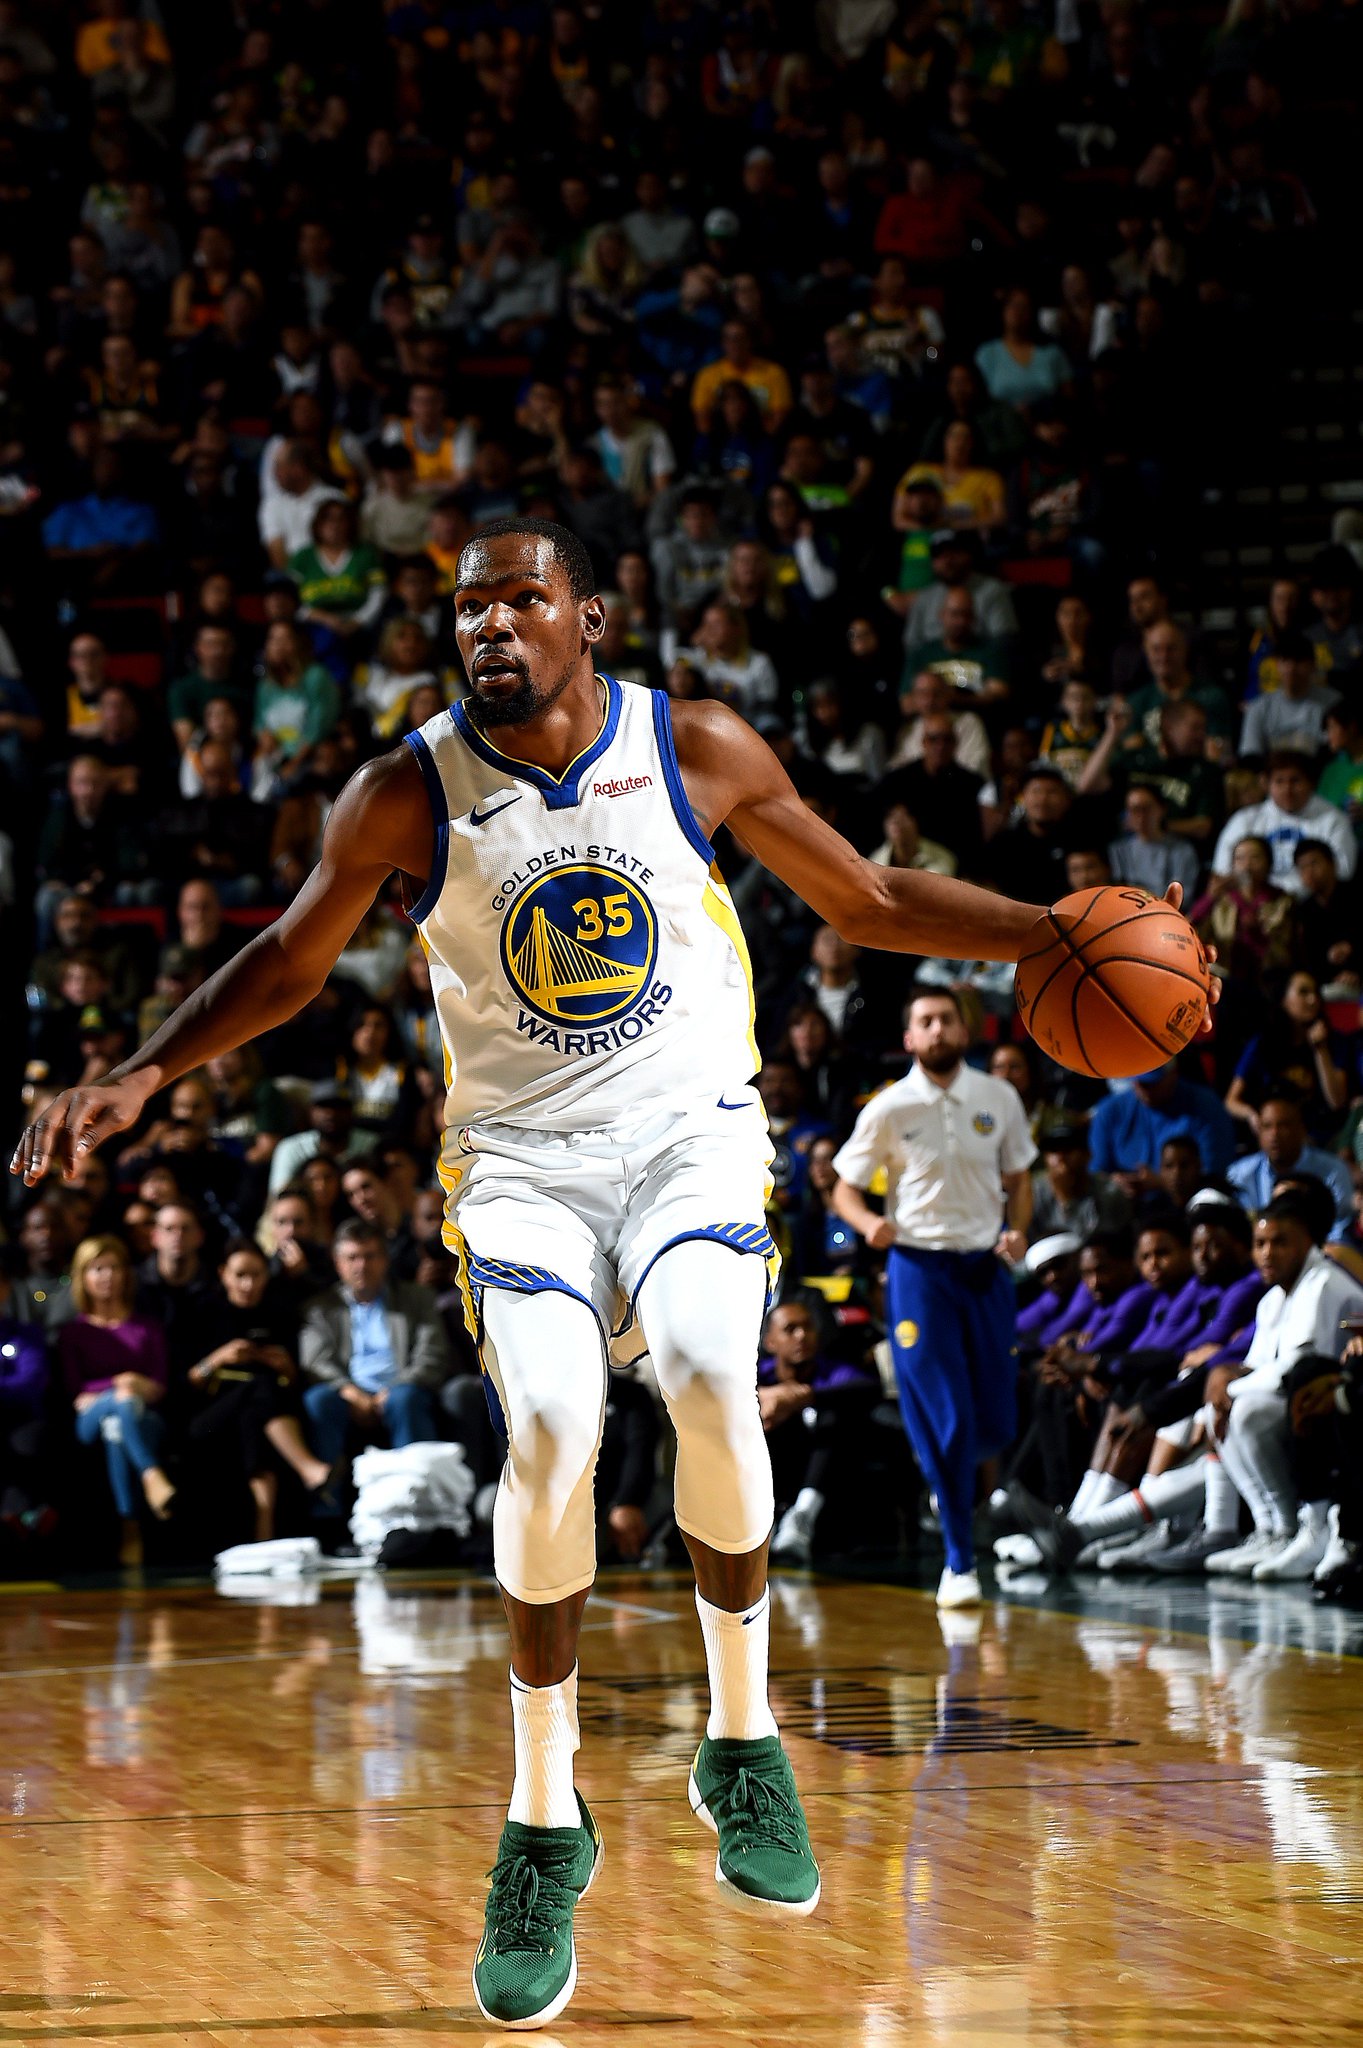 Sporting retro Shawn Kemp jersey, Kevin Durant receives massive